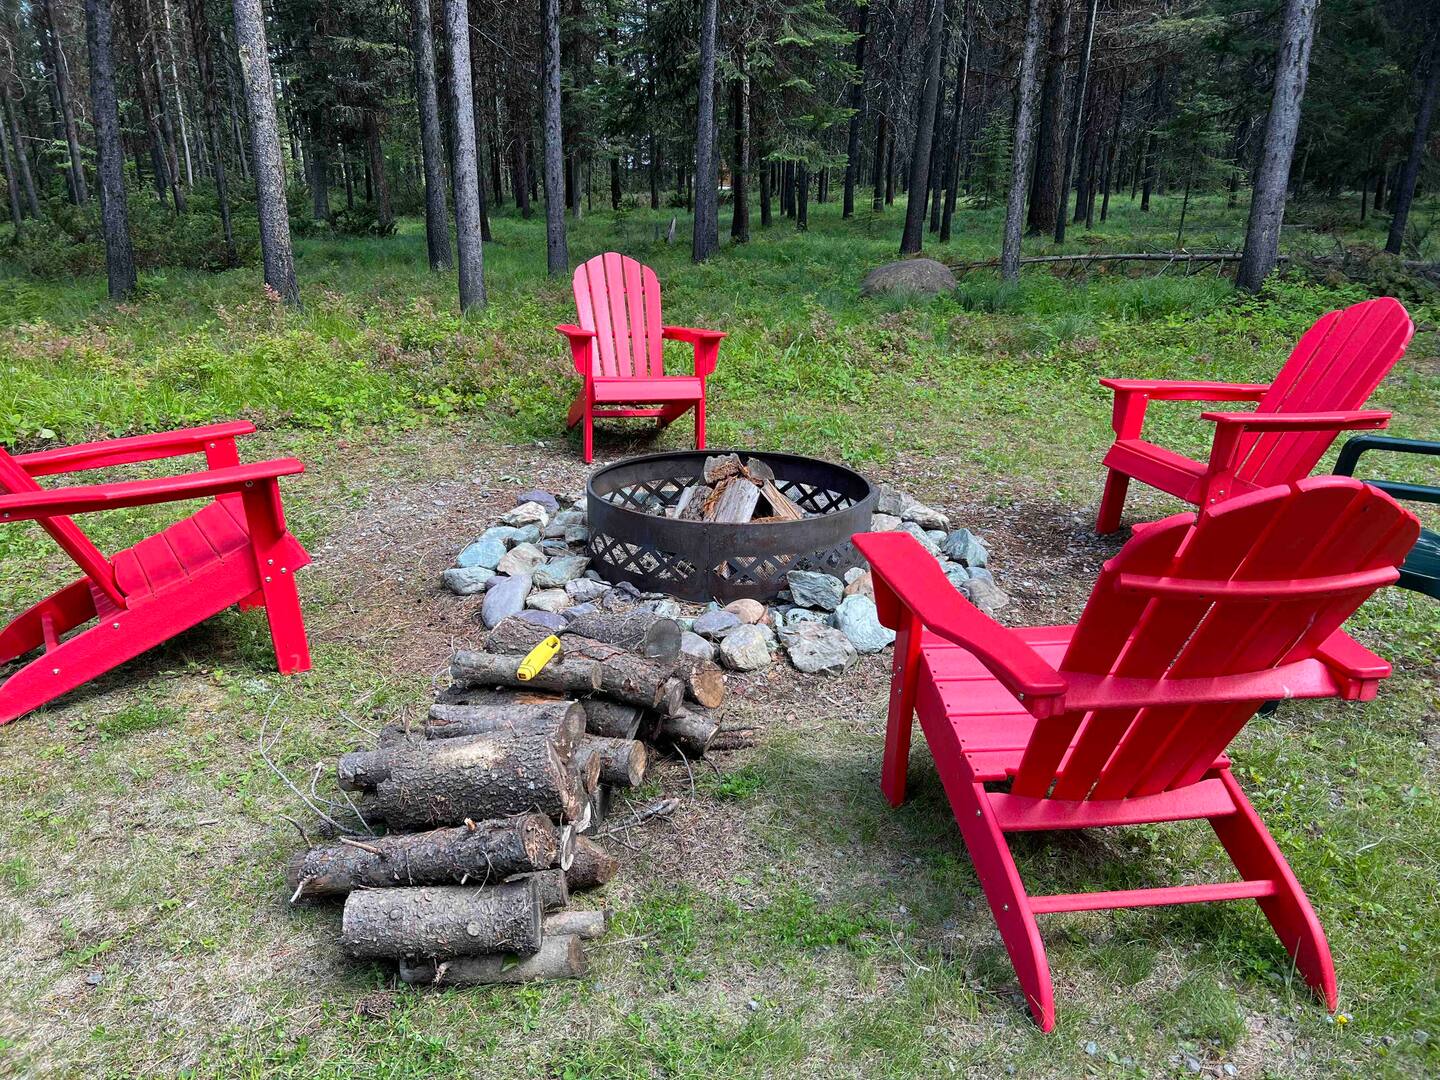 A place for campfire with four red chairs